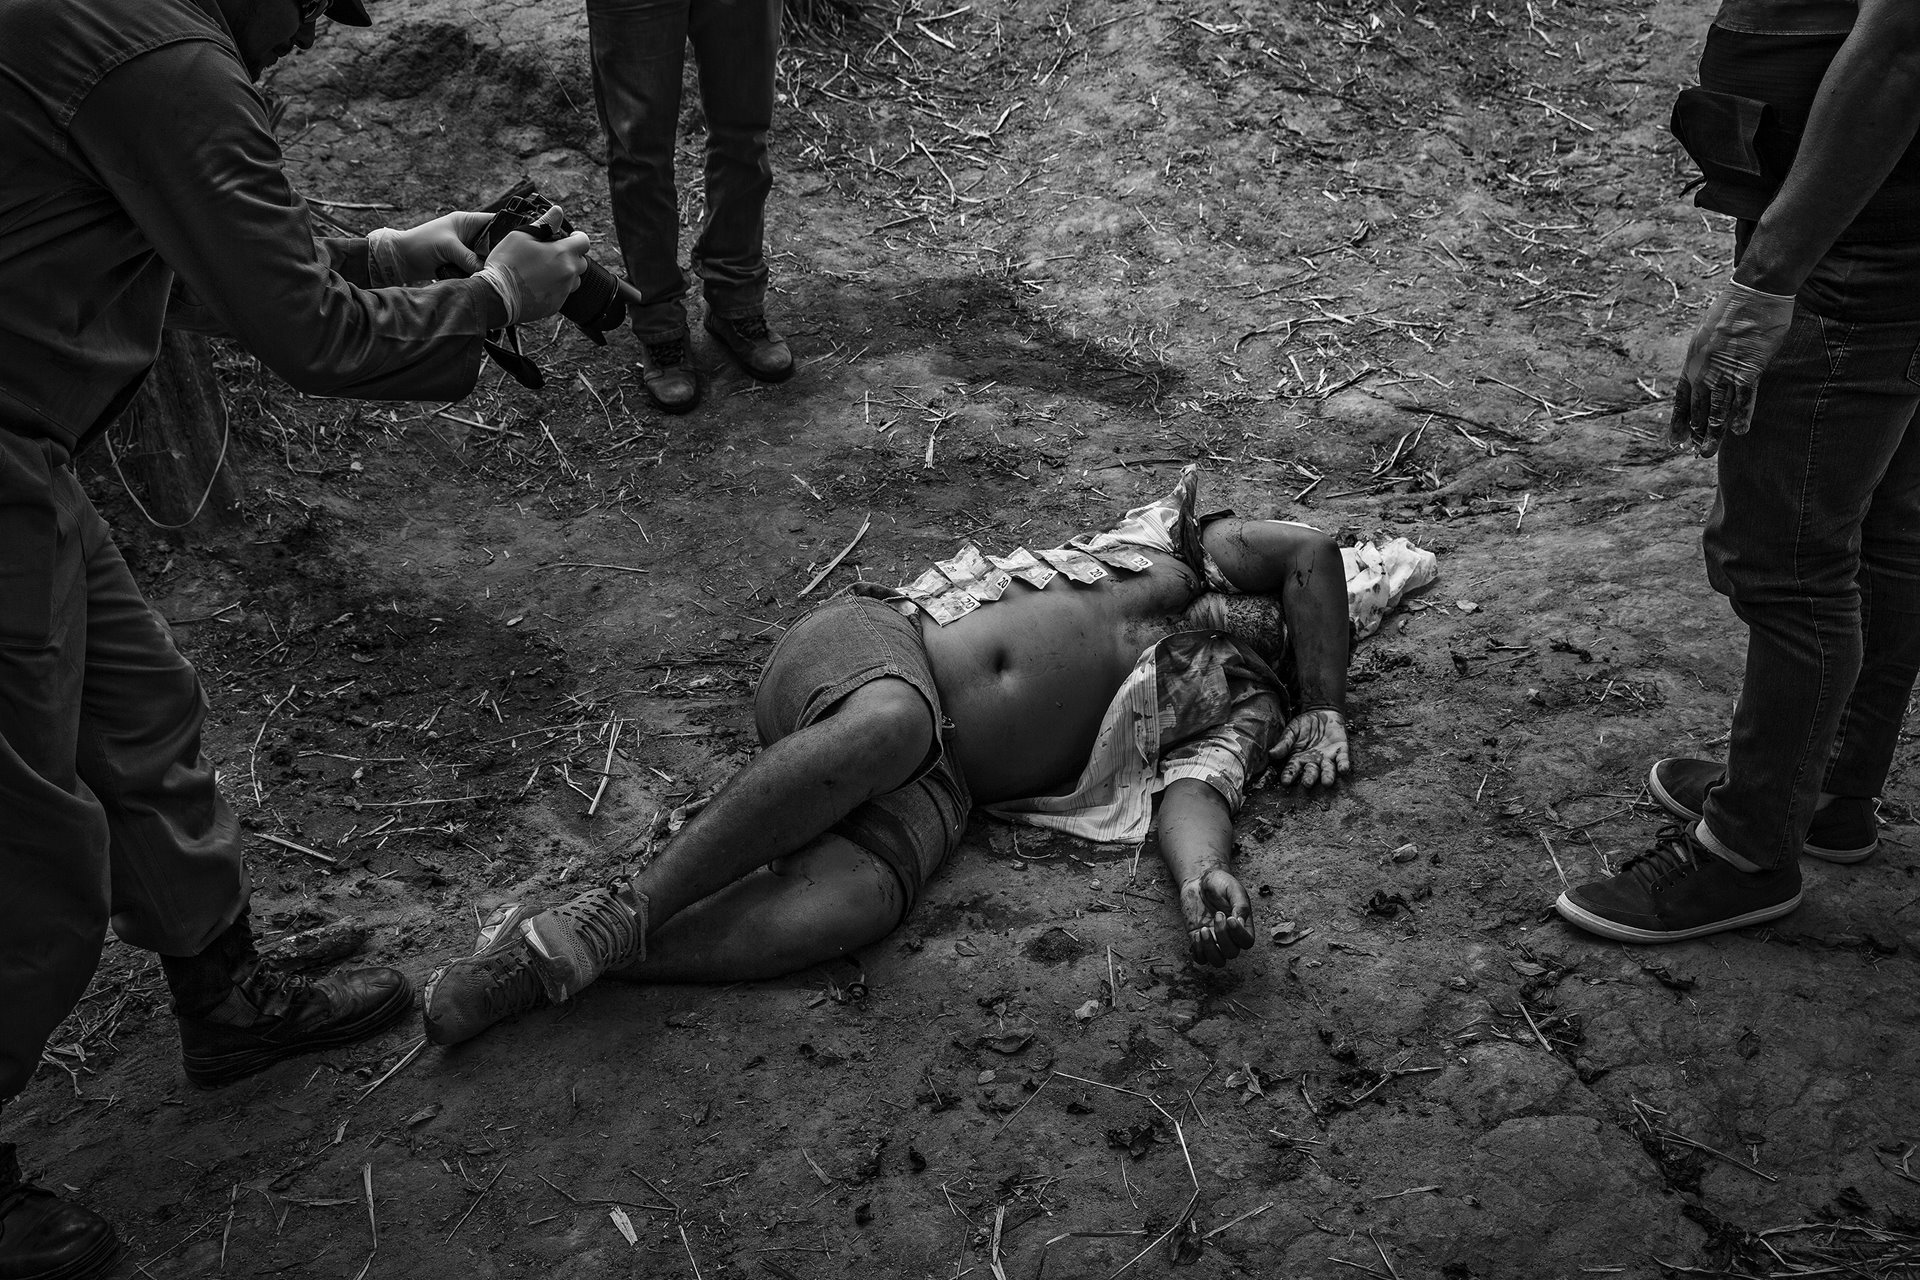 <p>Police officers examine the body of a man killed in rural Altamira, near the Belo Monte Dam, Pará, Brazil. They have laid out banknotes found on the dead man, which they say indicates this was not a robbery but an extra-judicial killing. The 2017 Violence Atlas, published annually by Brazil&rsquo;s Institute of Applied Economic Research (IPEA), ranked Altamira as Brazil&rsquo;s most violent city.</p>
